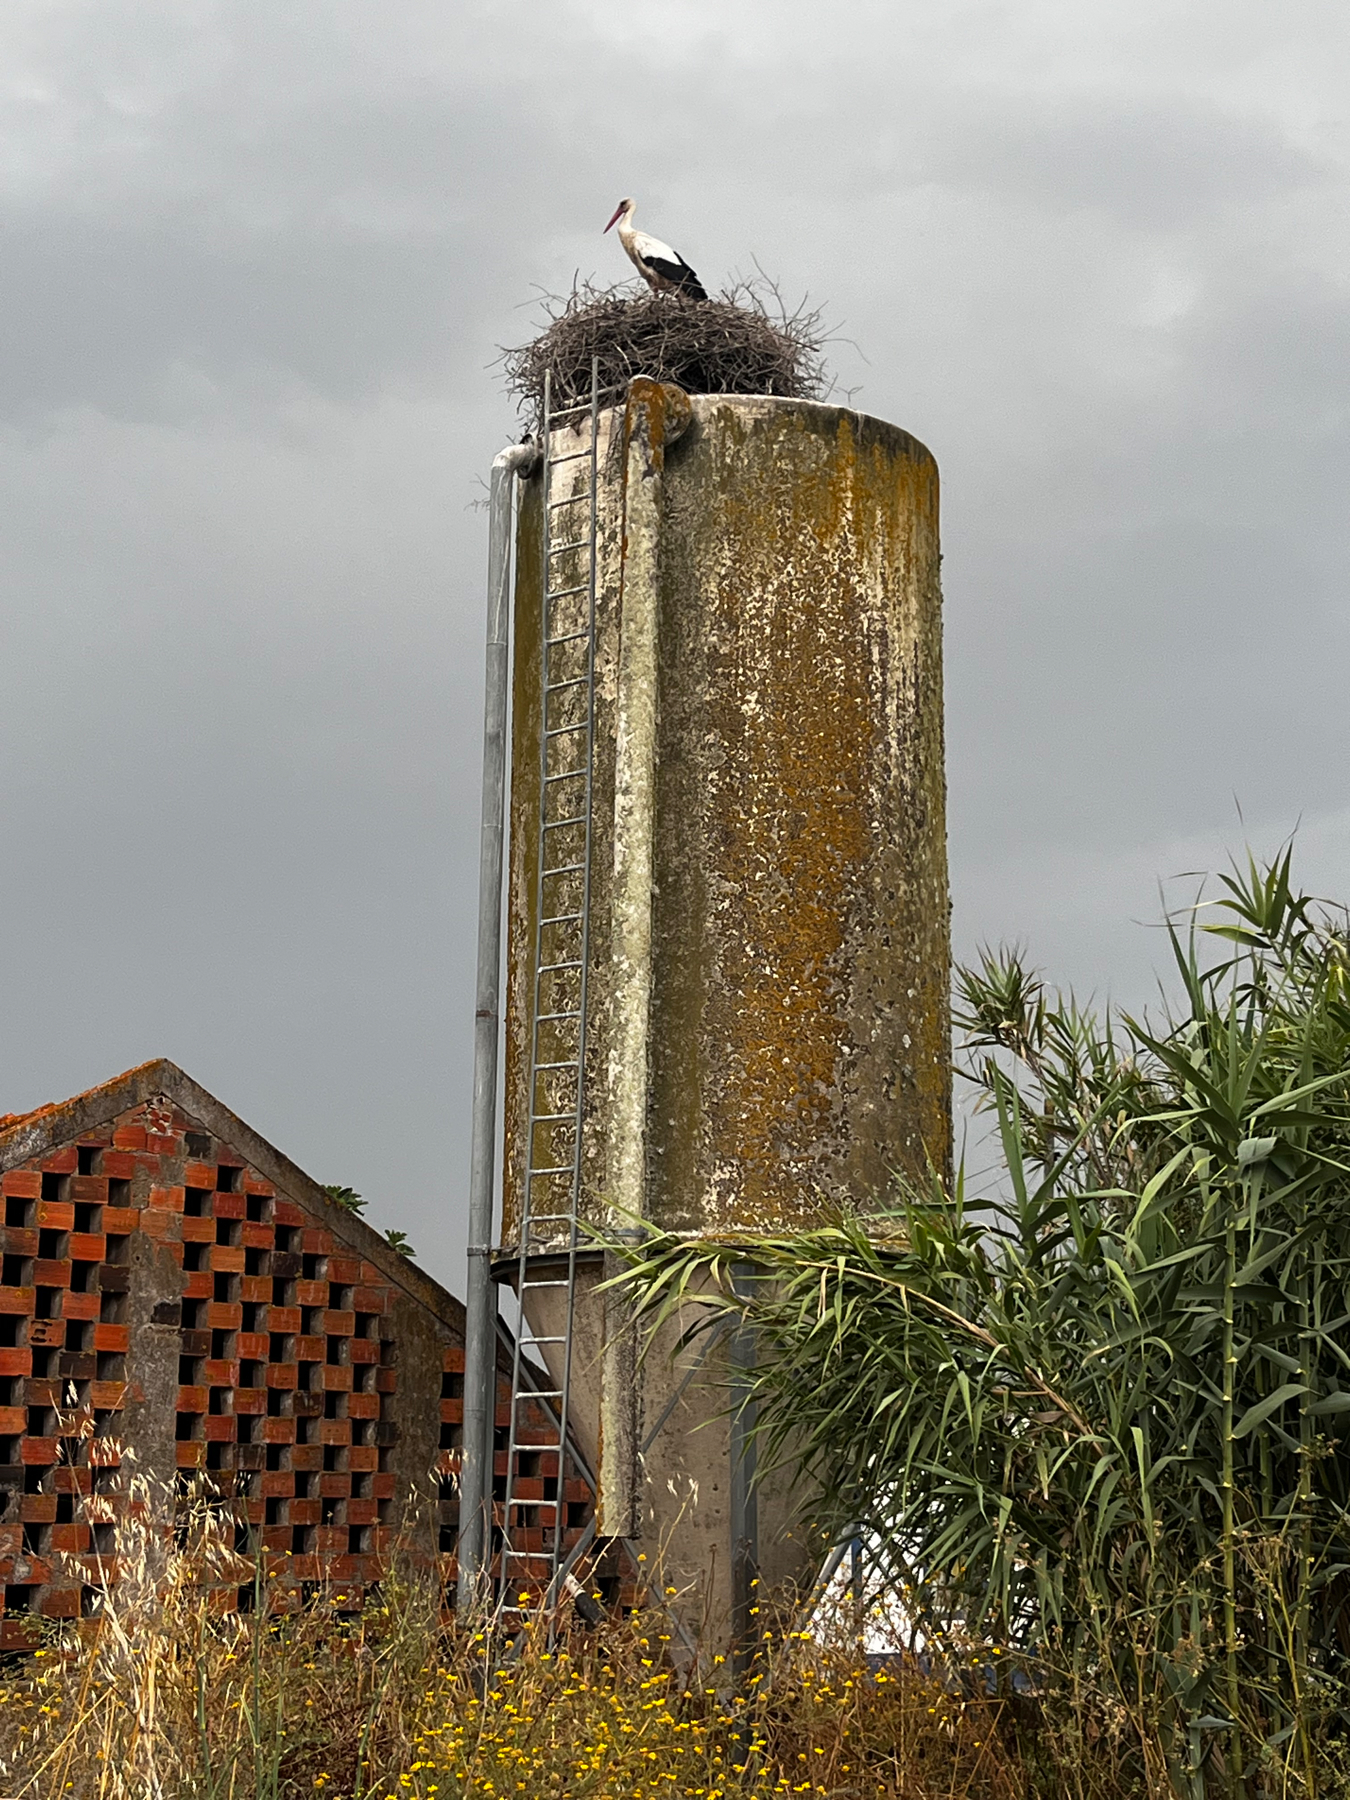 A tall, cylindrical concrete structure with a bird’s nest on top. A stork is standing in the nest. A metal ladder runs along the side of the structure. The background is overcast, with a smaller brick building and green vegetation nearby.